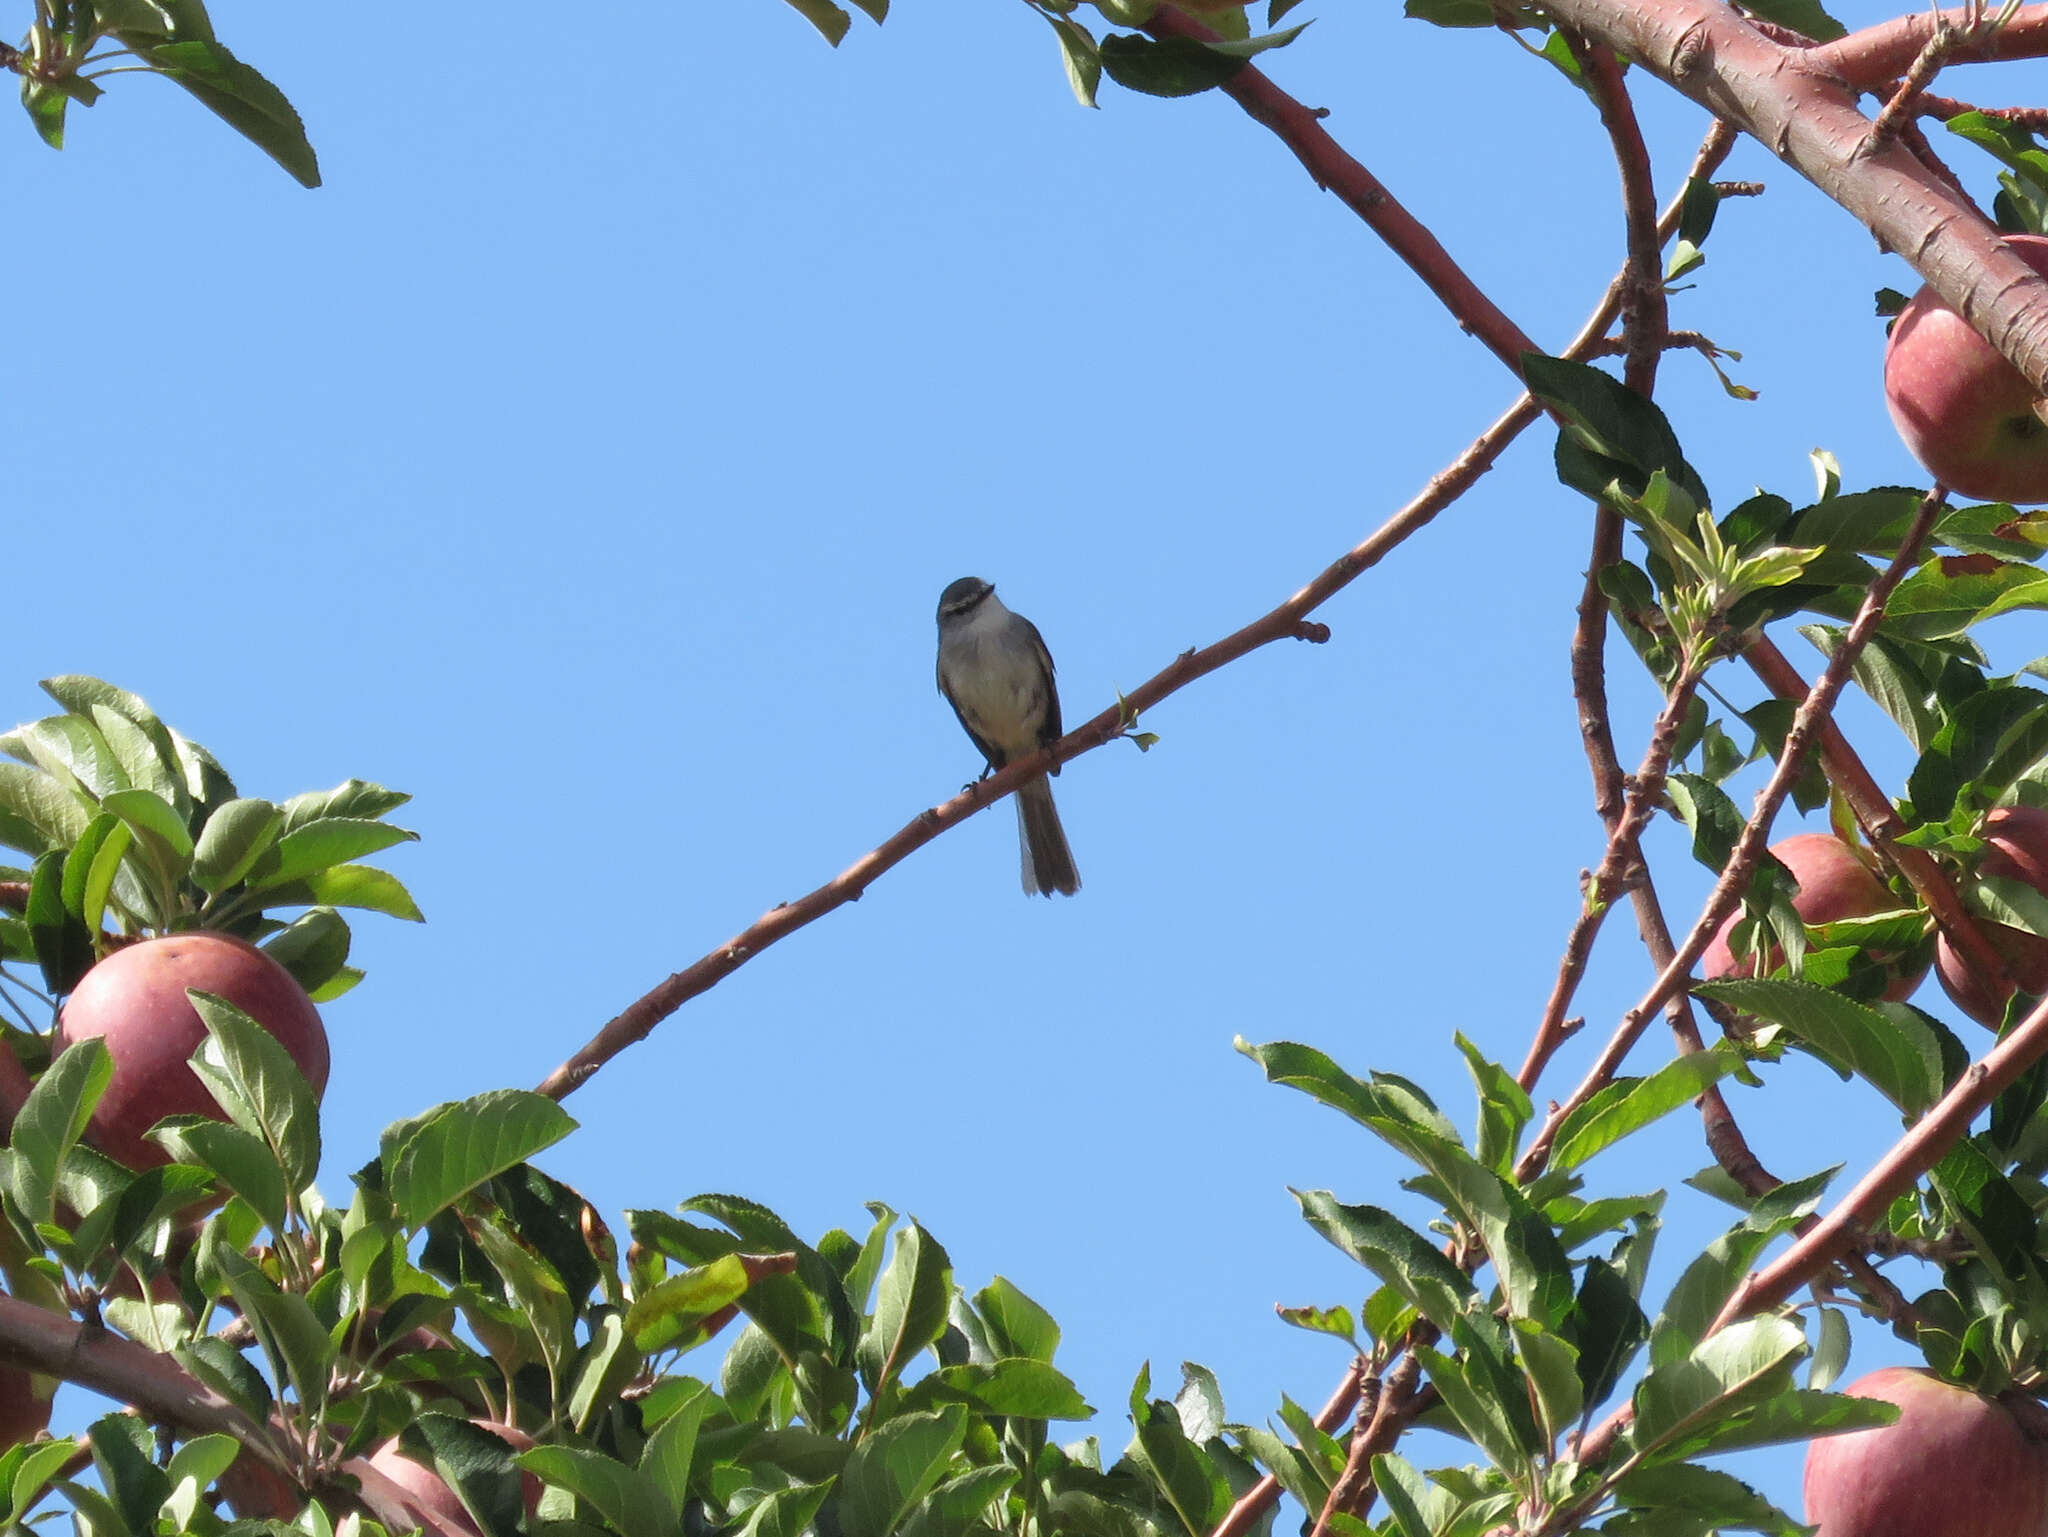 Image of White-crested Tyrannulet